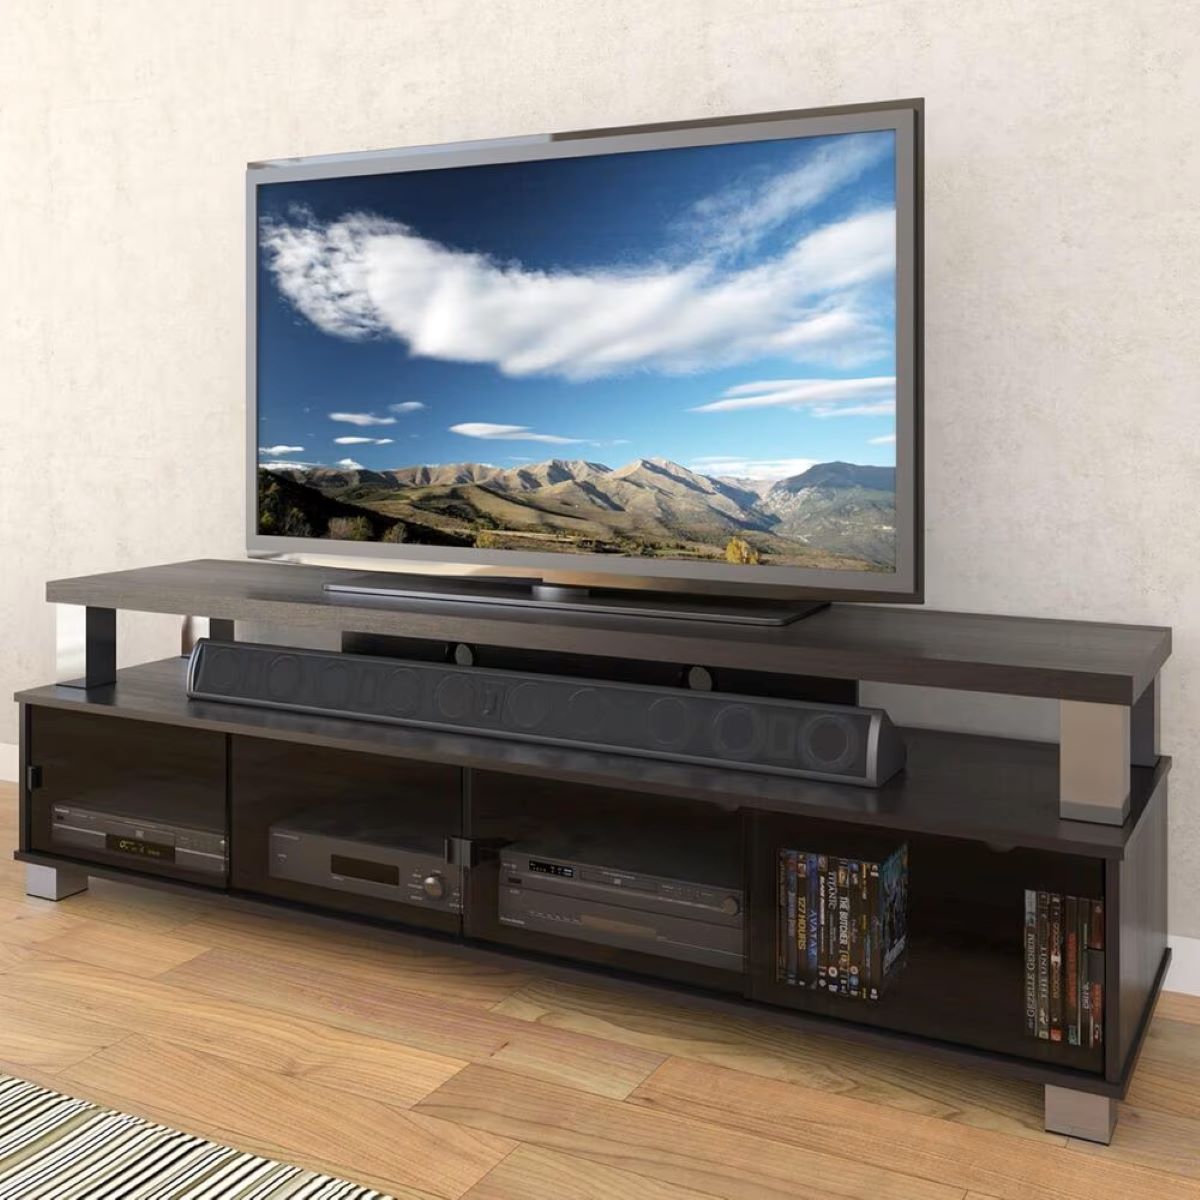 How Big Does A TV Stand Need To Be For A 75-Inch TV